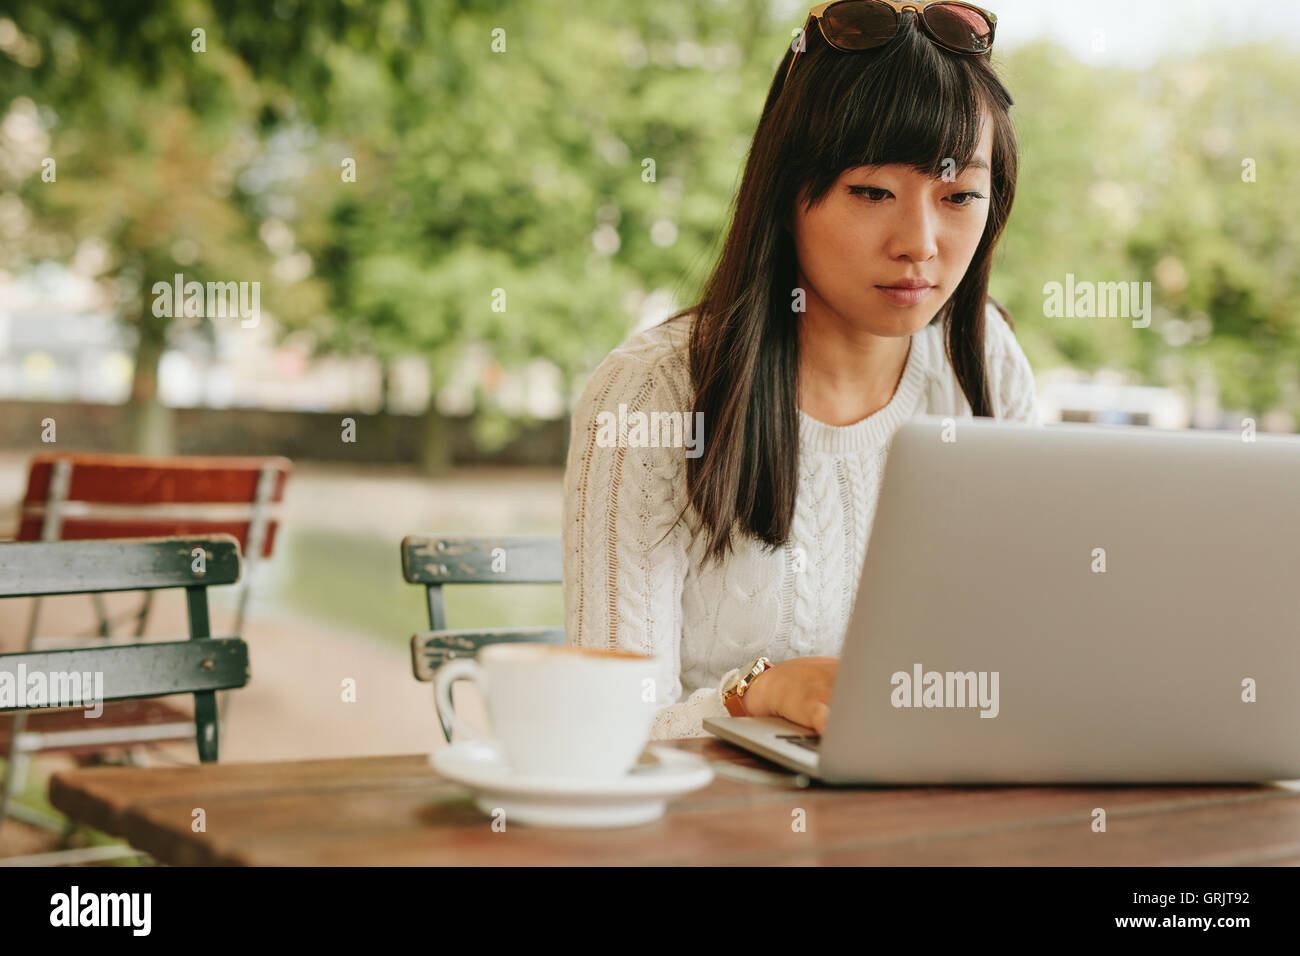 Shot of young woman sitting at cafe table outdoors and working on laptop computer. Asian female surfing internet on laptop. Stock Photo